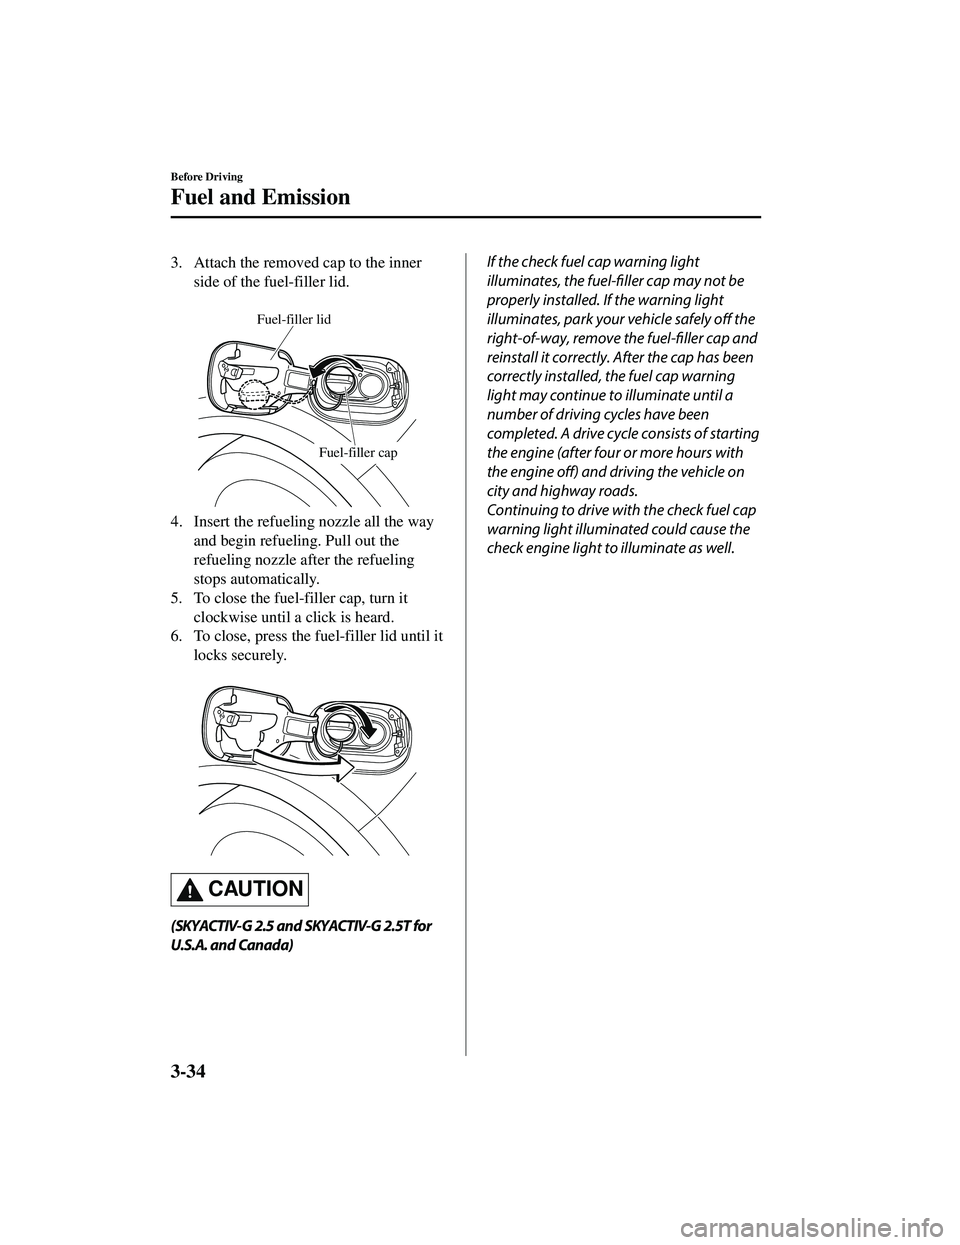 MAZDA MODEL CX-5 2021  Owners Manual 3. Attach the removed cap to the innerside of the fuel-filler lid.
 
Fuel-filler cap
Fuel-filler lid
4. Insert the refueling nozzle all the wayand begin refueling. Pull out the
refueling nozzle after 